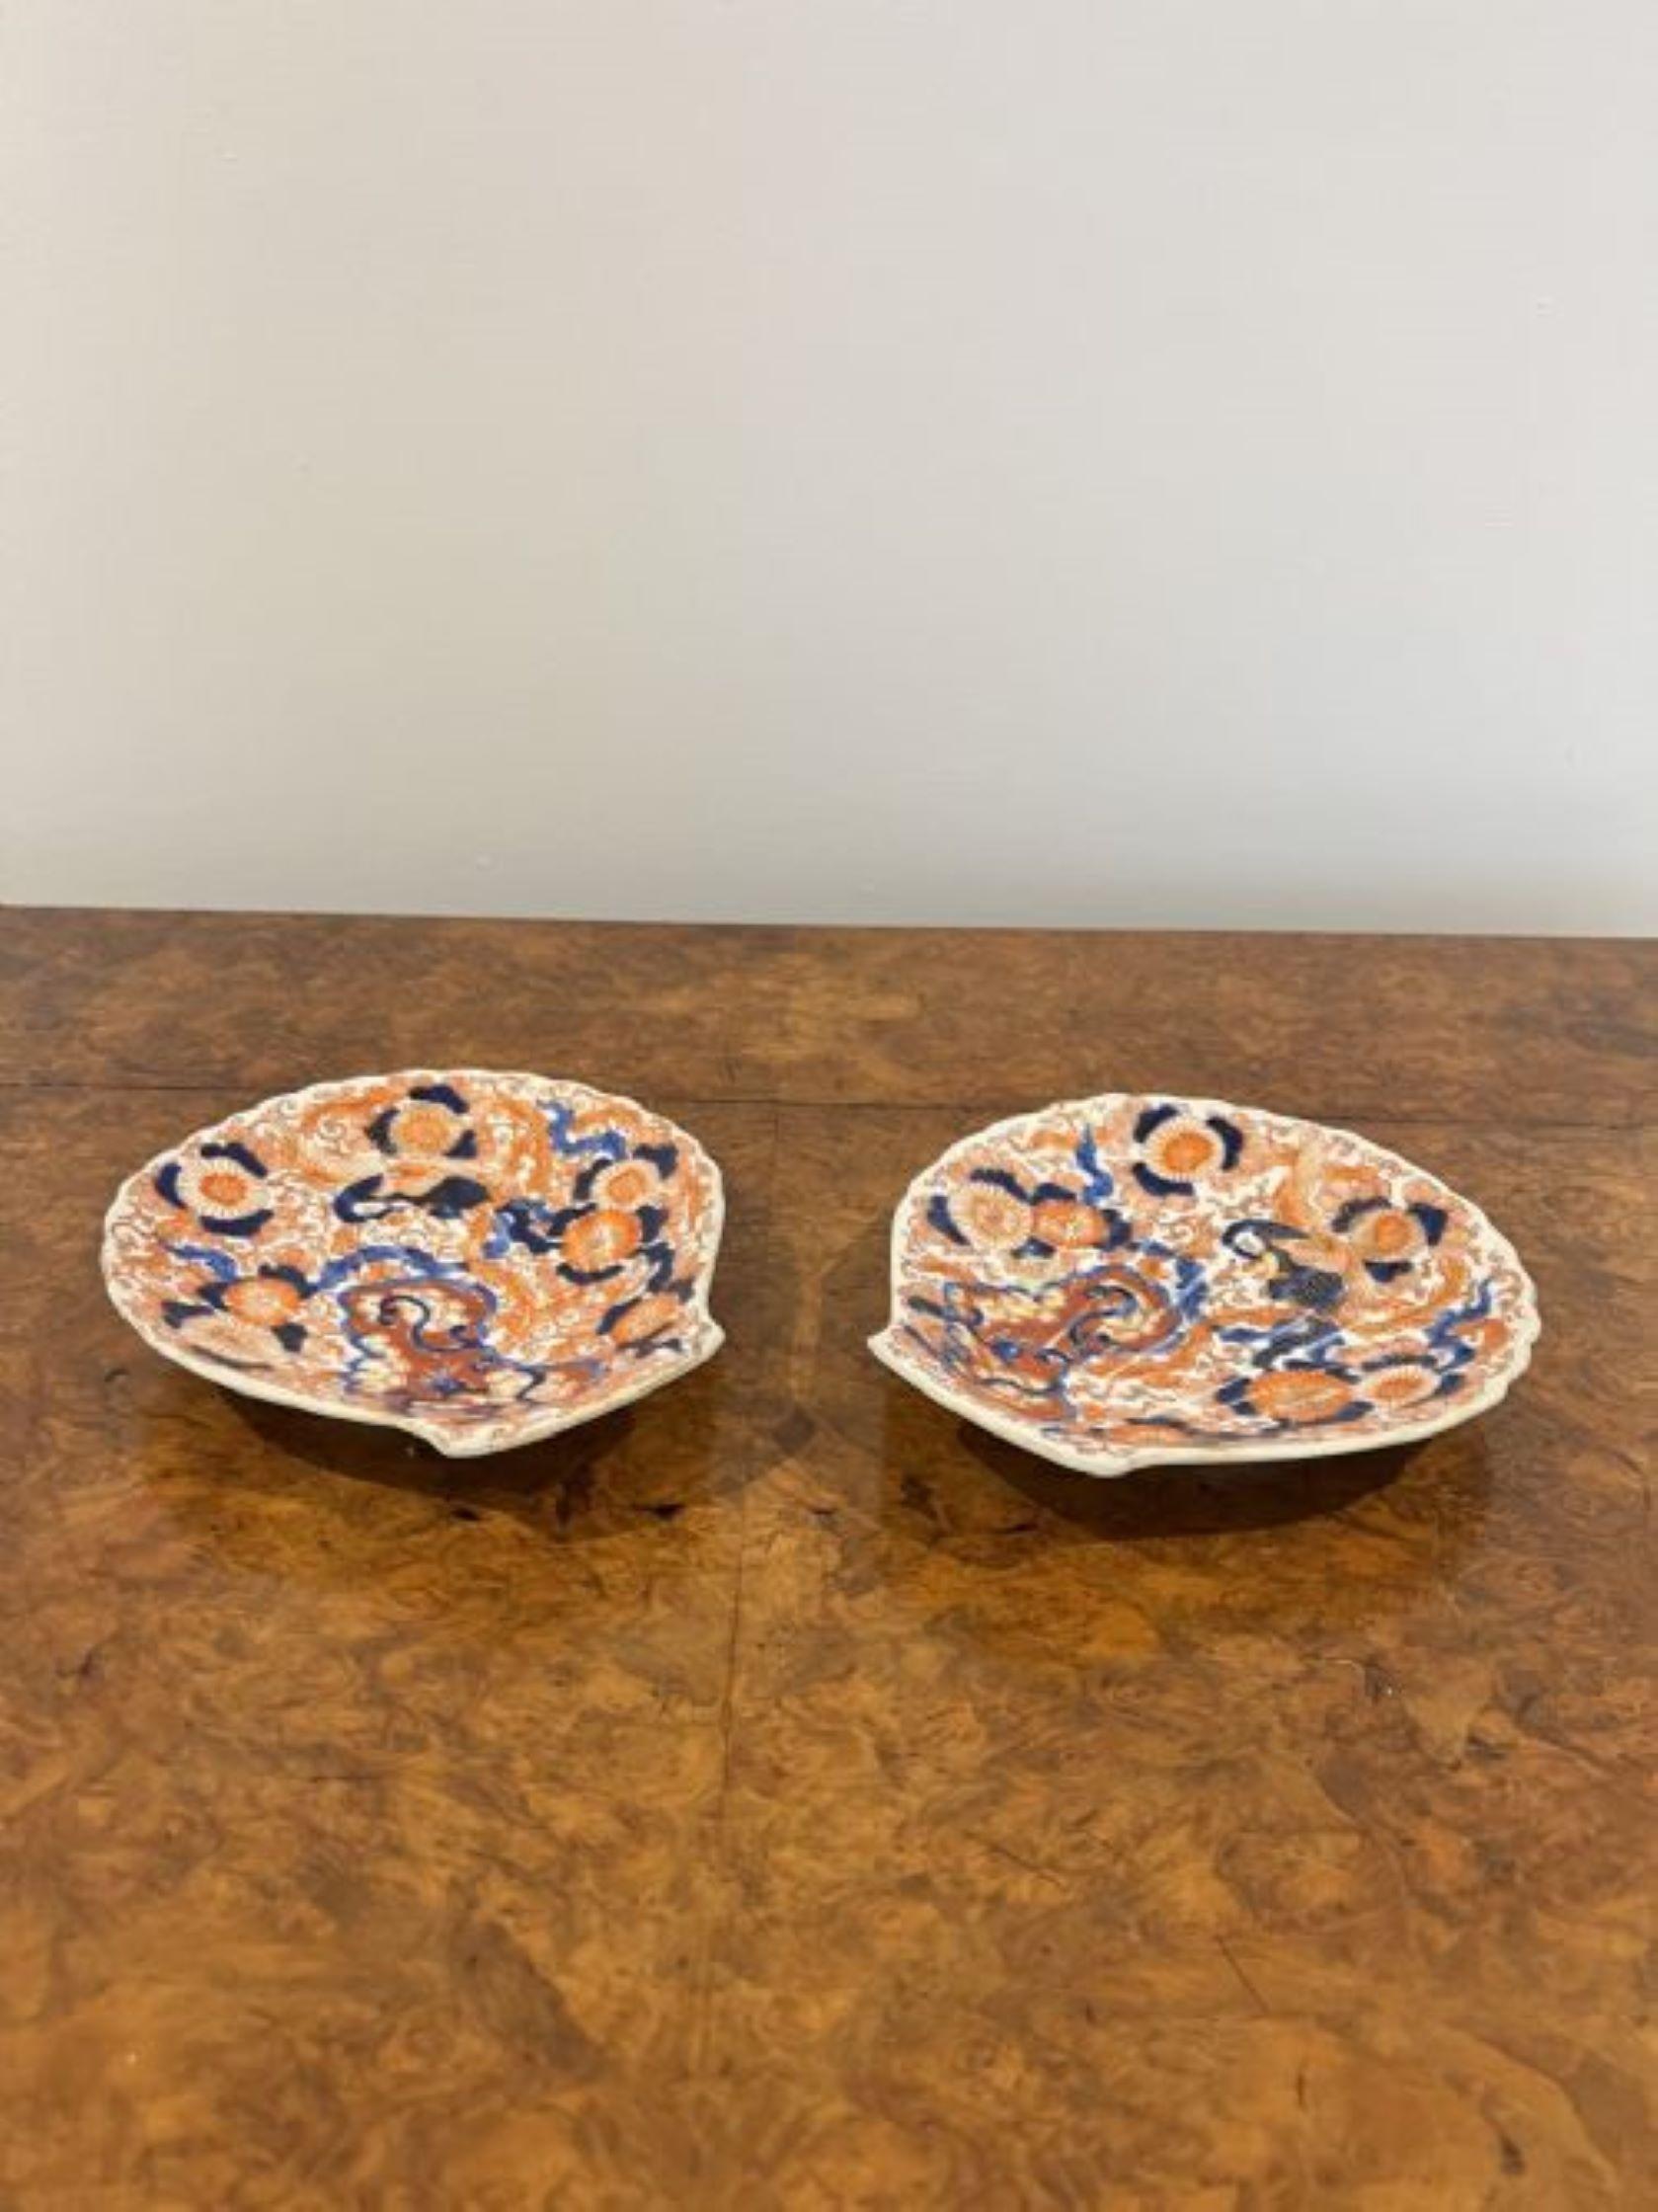 Superb quality pair of antique Japanese Imari shell shaped plates having a superb quality pair of antique Japanese Imari scalloped shell shaped plates with fantastic decoration with flowers, birds and scrolls hand painted in wonderful gold, red,